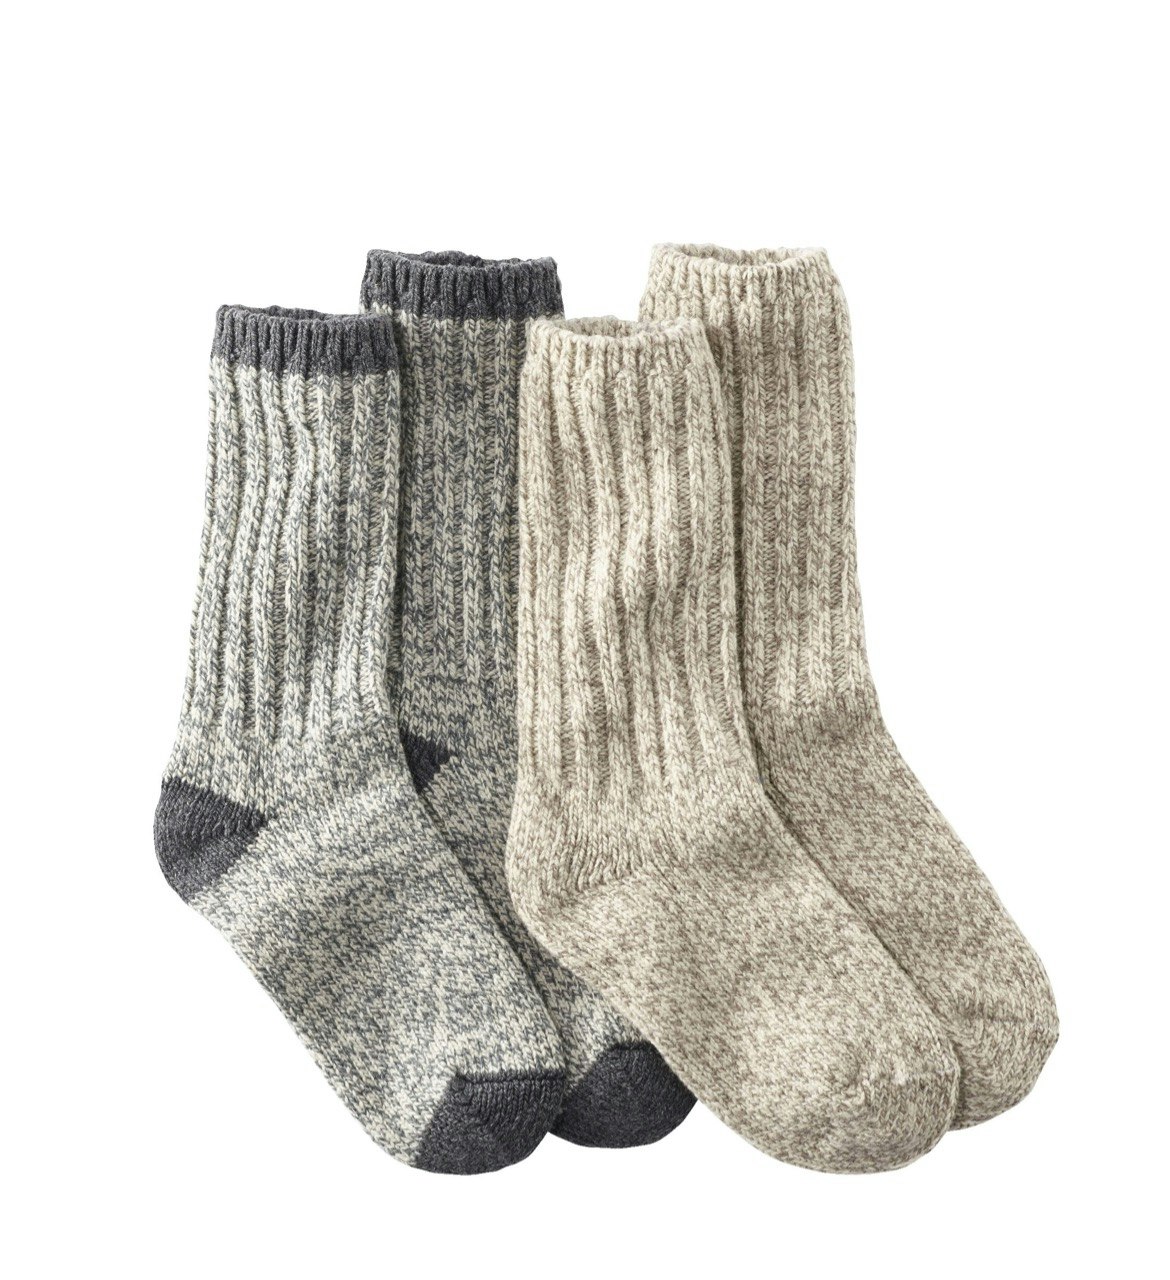 L.L.Bean Merino Wool Ragg Socks in balsam and gray on a white background